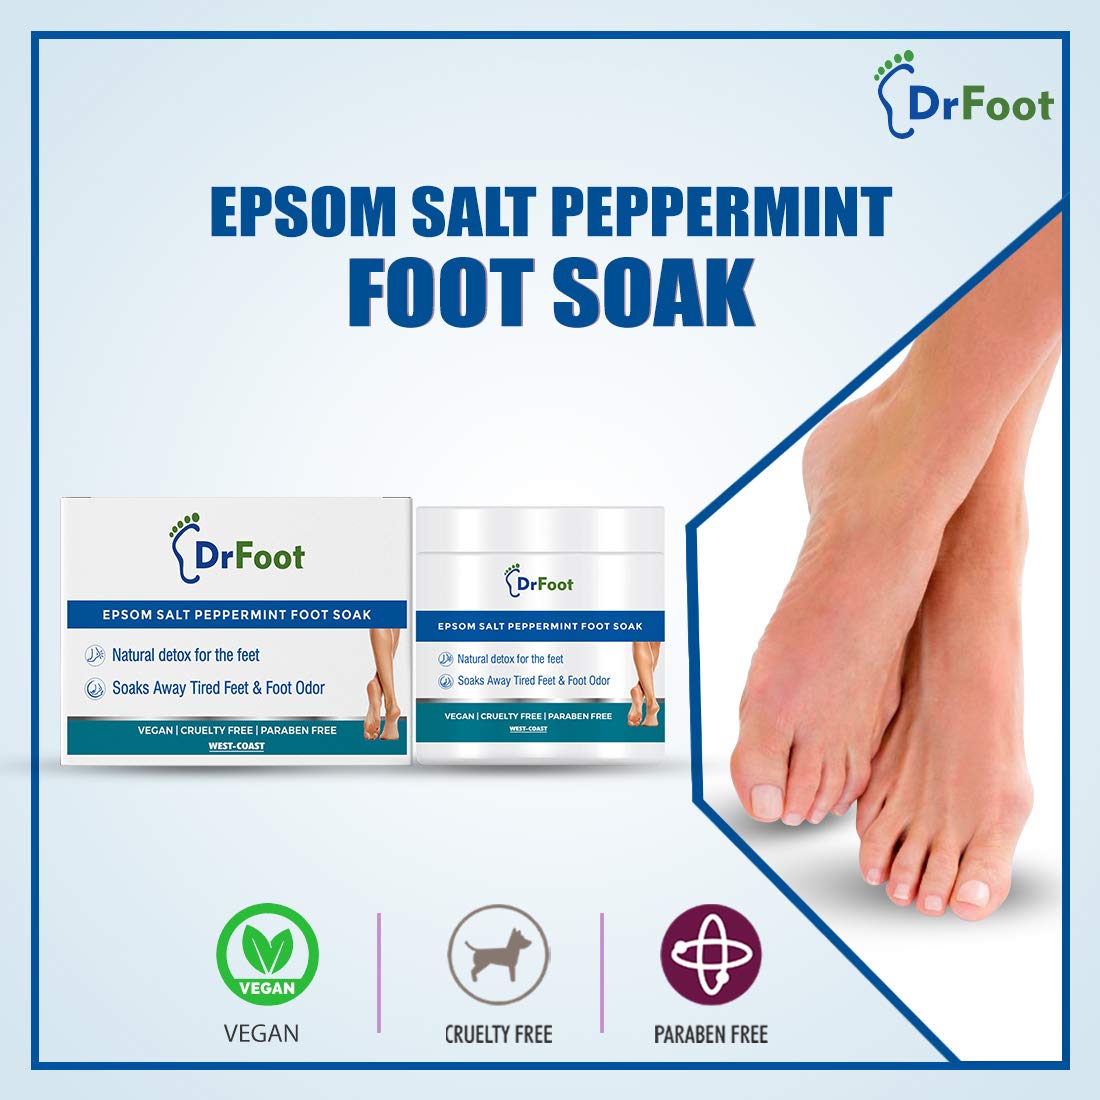 Dr Foot Epsom Salt Peppermint Crystals Foot Soak (Magnesium Sulphate) For Muscle Aches, Pain Relief, Relaxation, Spa Treatment for Bathing and Foot – 200gm (Pack of 5)